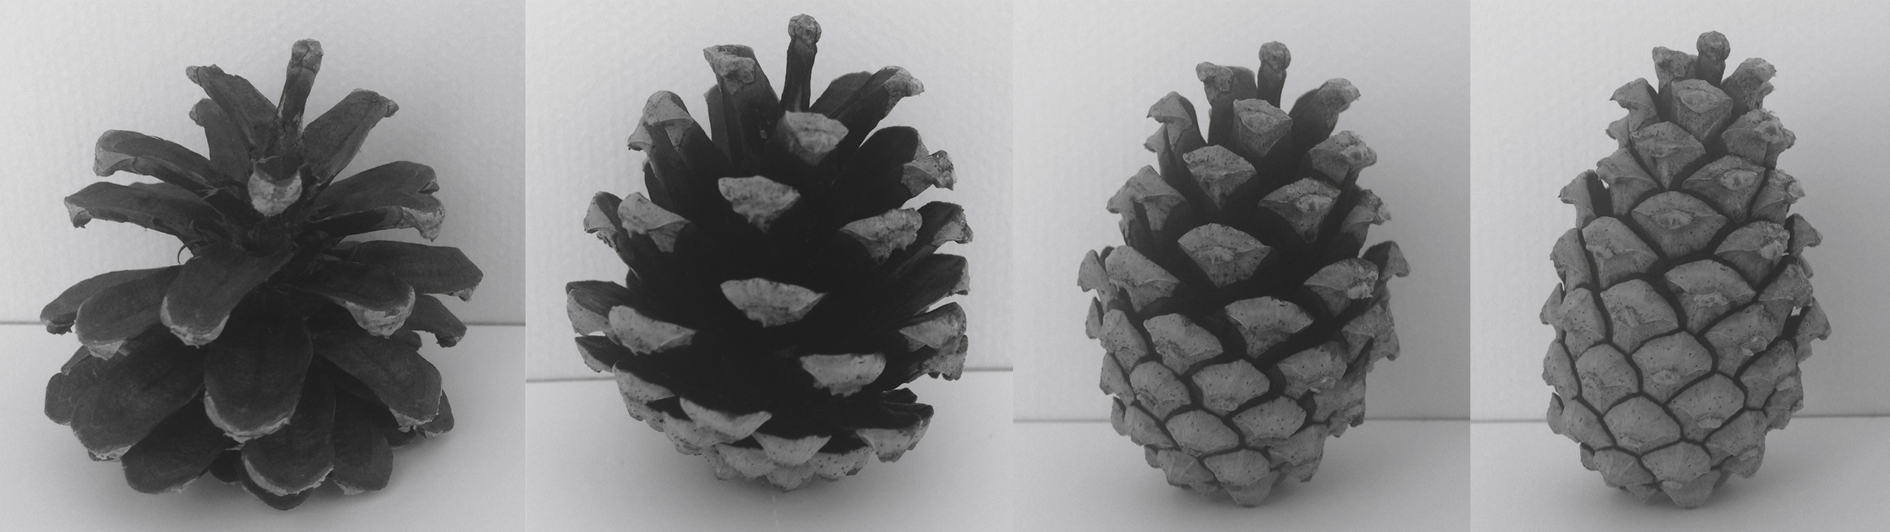 Experiments of opening and closing movements in conifer cones due to humidity level changes.